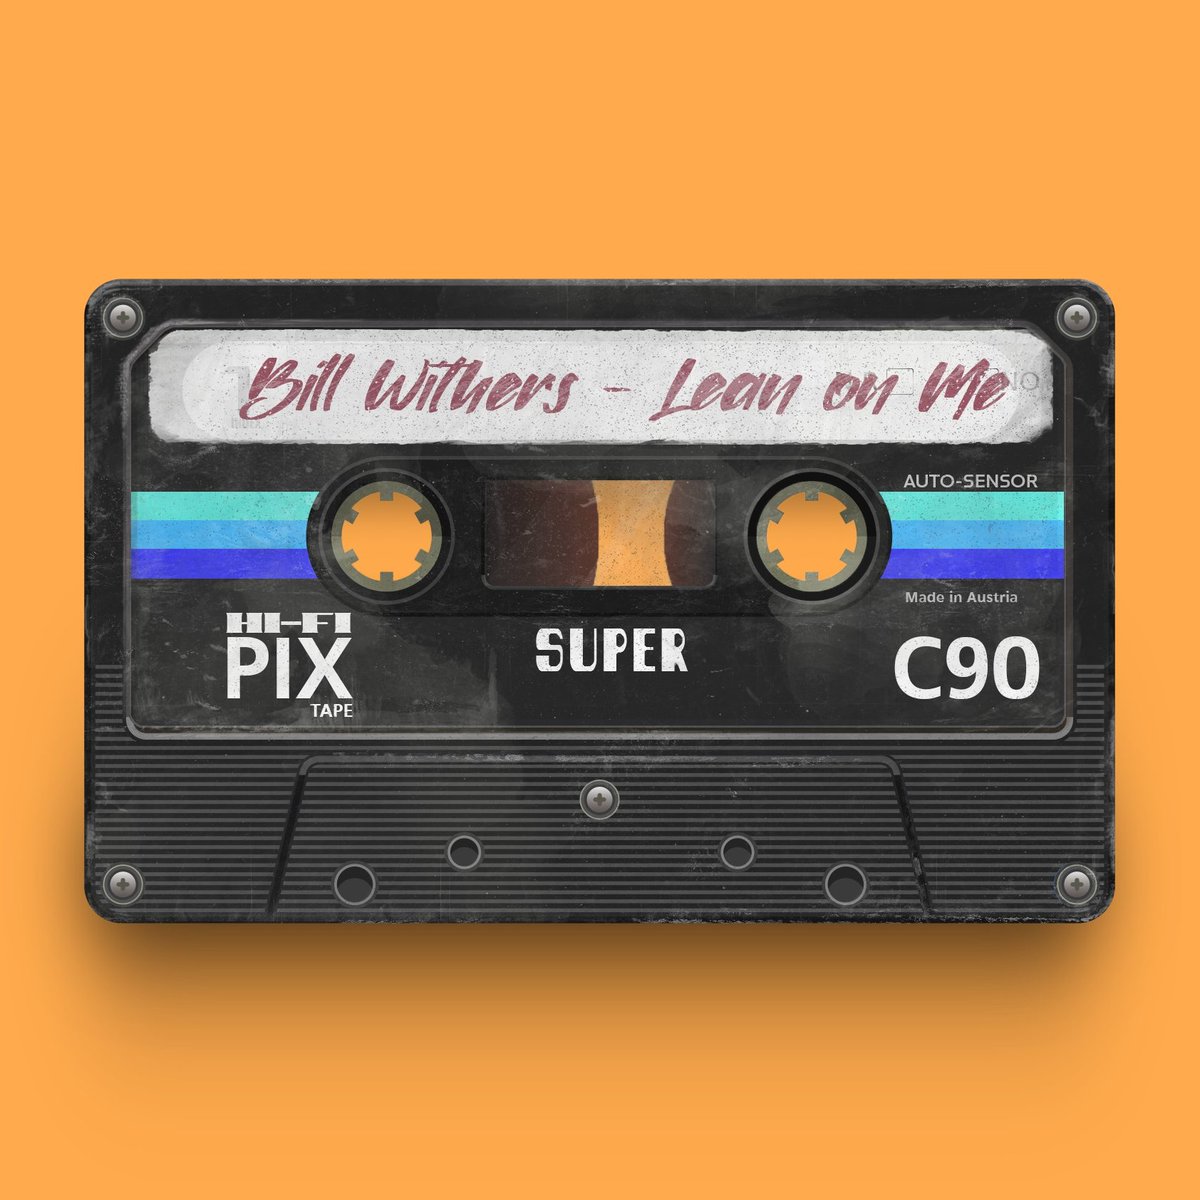 When I saw @billwithers - Lean on Me (our wedding 'first dance' song) as an NFT, I had to grab it and immortalize this memory on the Block Chain. It will make an awesome print for the wall too! Thanks @PixTapesNFT & Bill Withers for making music that helps us guys get hitched! https://t.co/c7stA4s8ZV